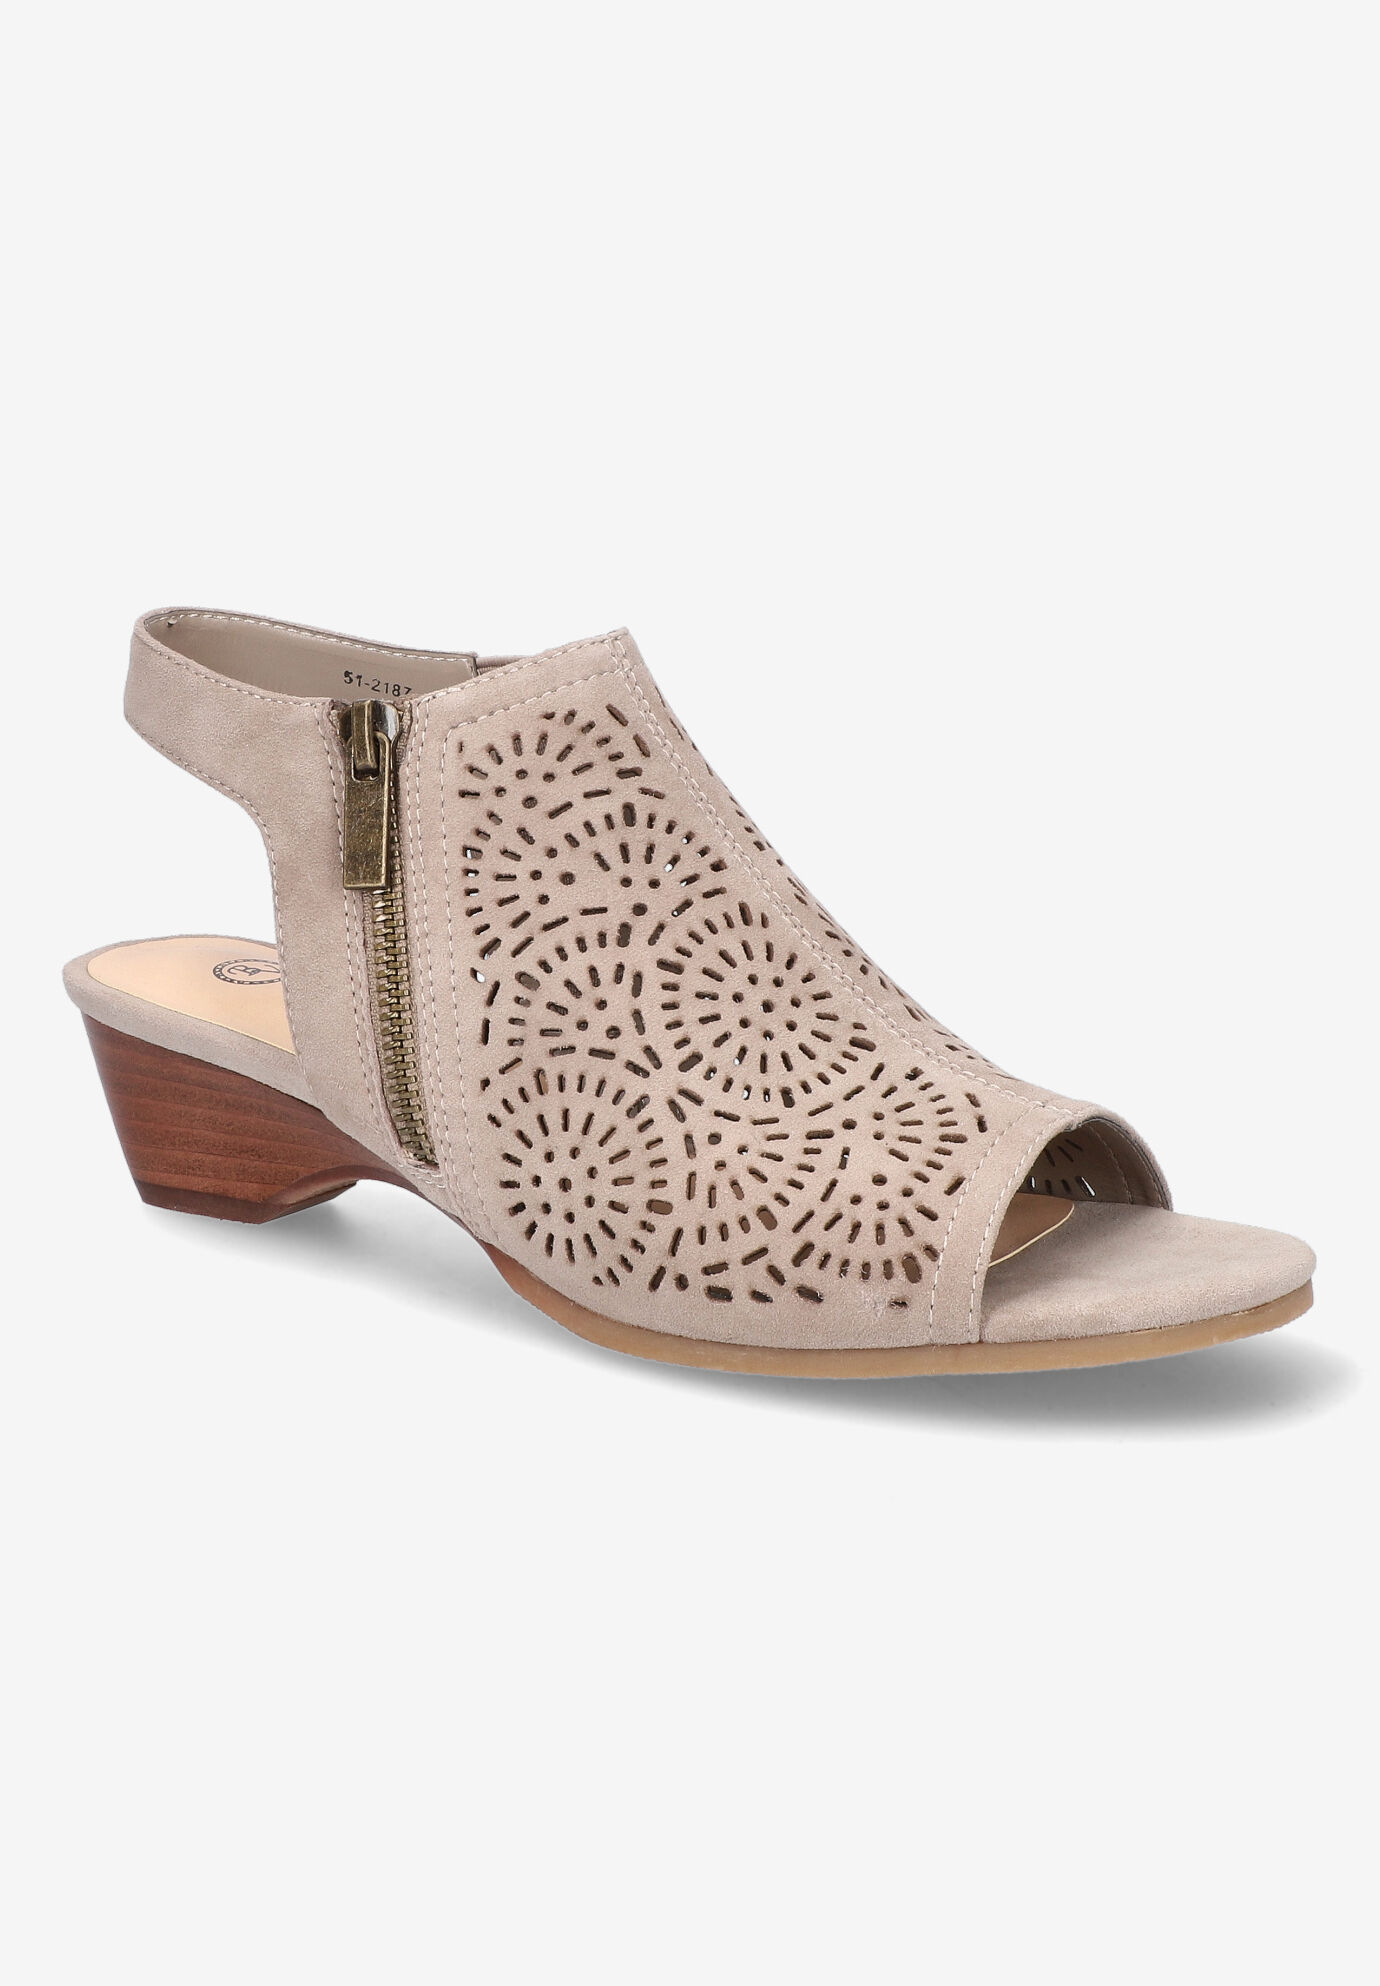 Extra Wide Width Women's Amiyah Sandal by Bella Vita in Stone Suede Leather (Size 7 1/2 WW)